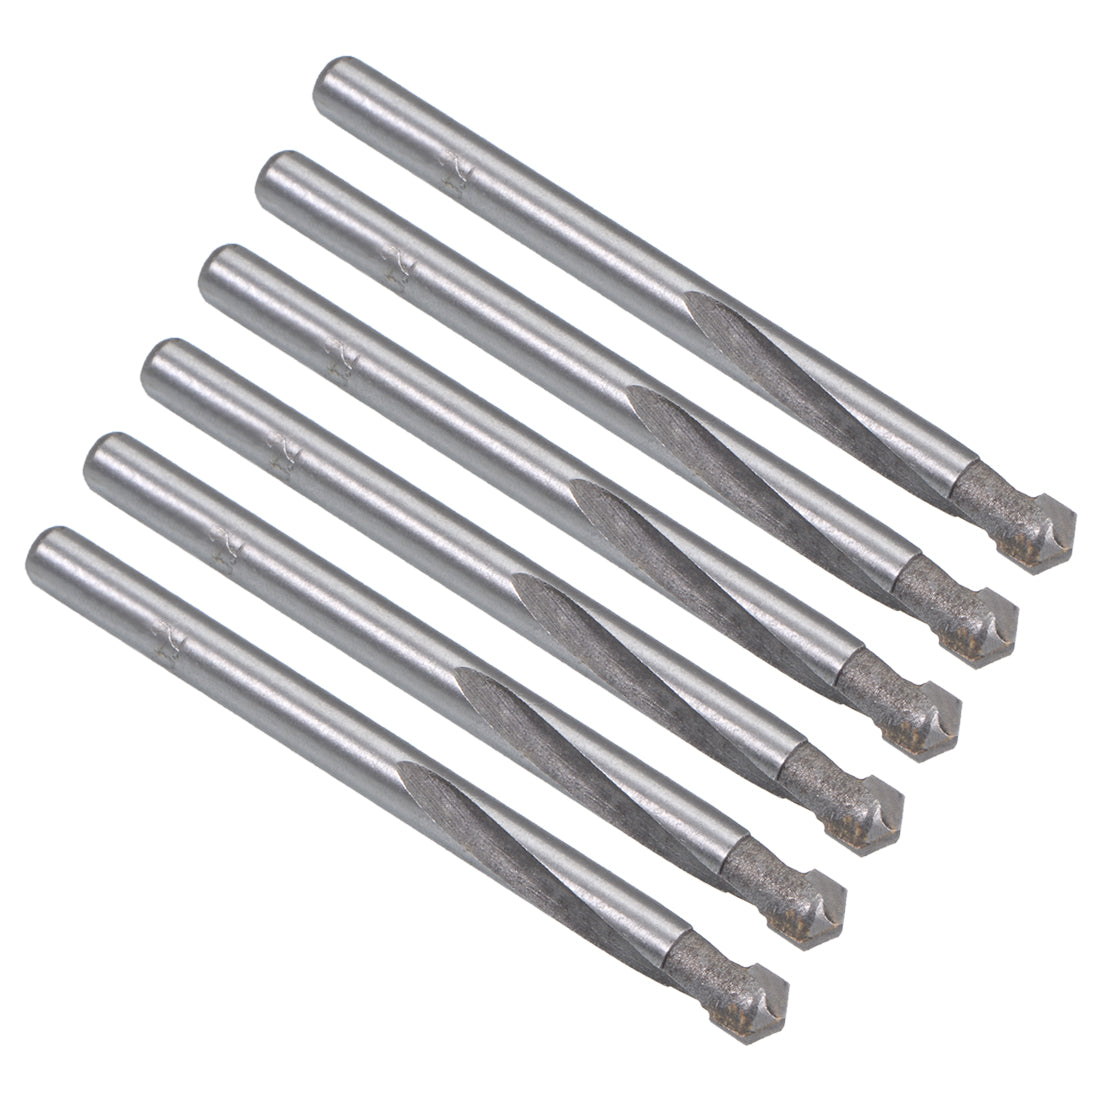 uxcell Uxcell 6.2mm Cemented Carbide Twist Drill Bits for Stainless Steel Copper Aluminum 6Pcs